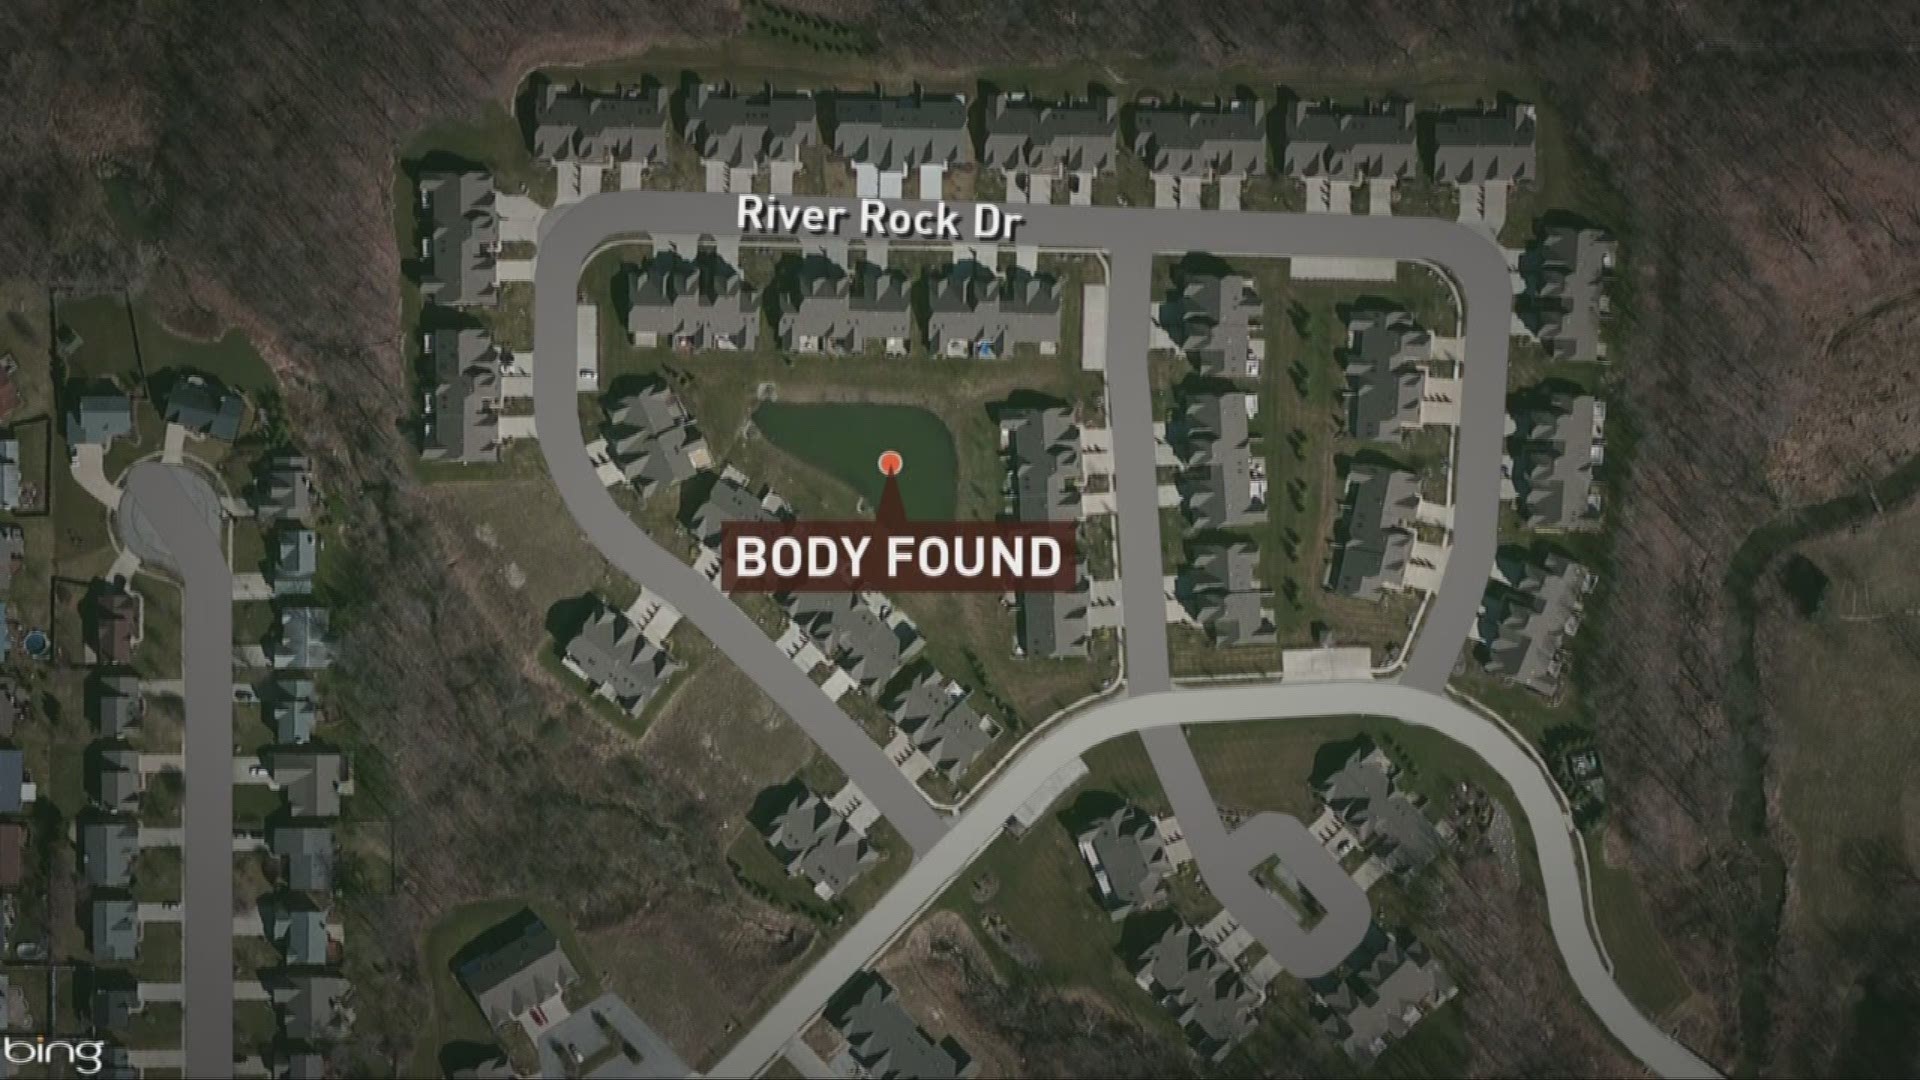 June 26, 2017: An investigation is underway after an elderly man was found dead in a Cuyahoga Falls pond.